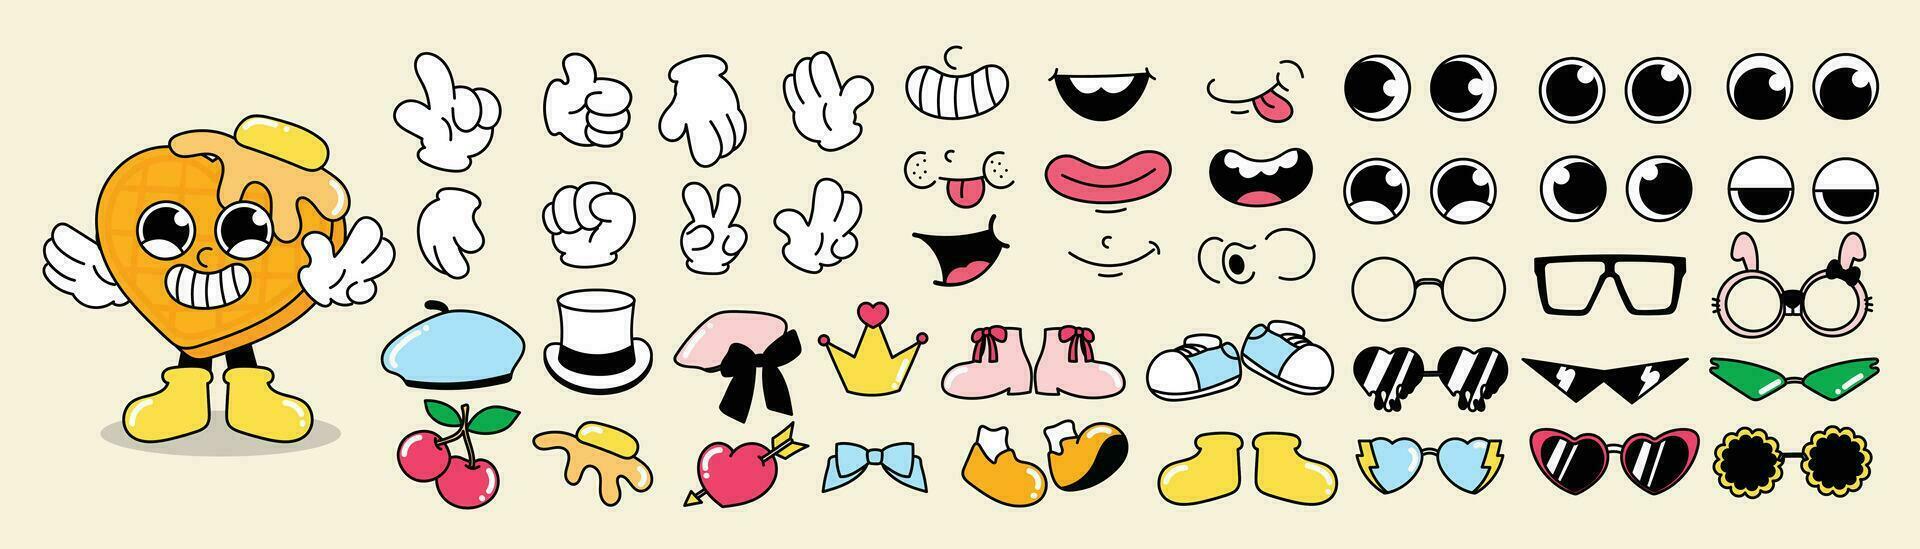 Set of 70s groovy comic vector. Collection of cartoon character faces in different emotions, hand, glove, glasses, hat, shoes, hairpin. Cute retro groovy hippie illustration for decorative, sticker. vector